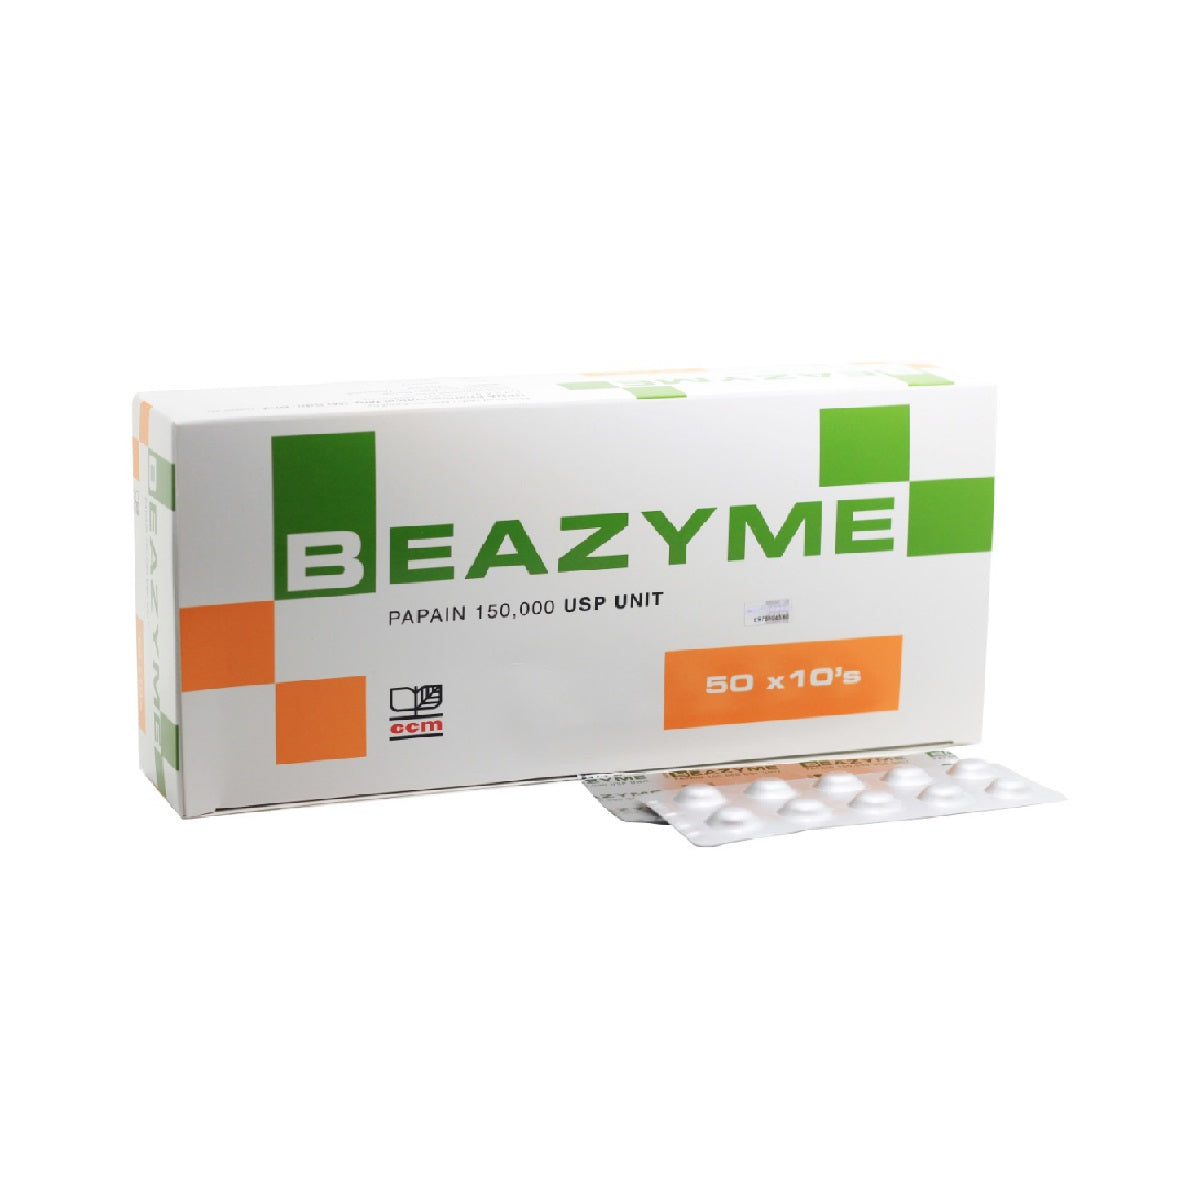 BEAZYME TABLET